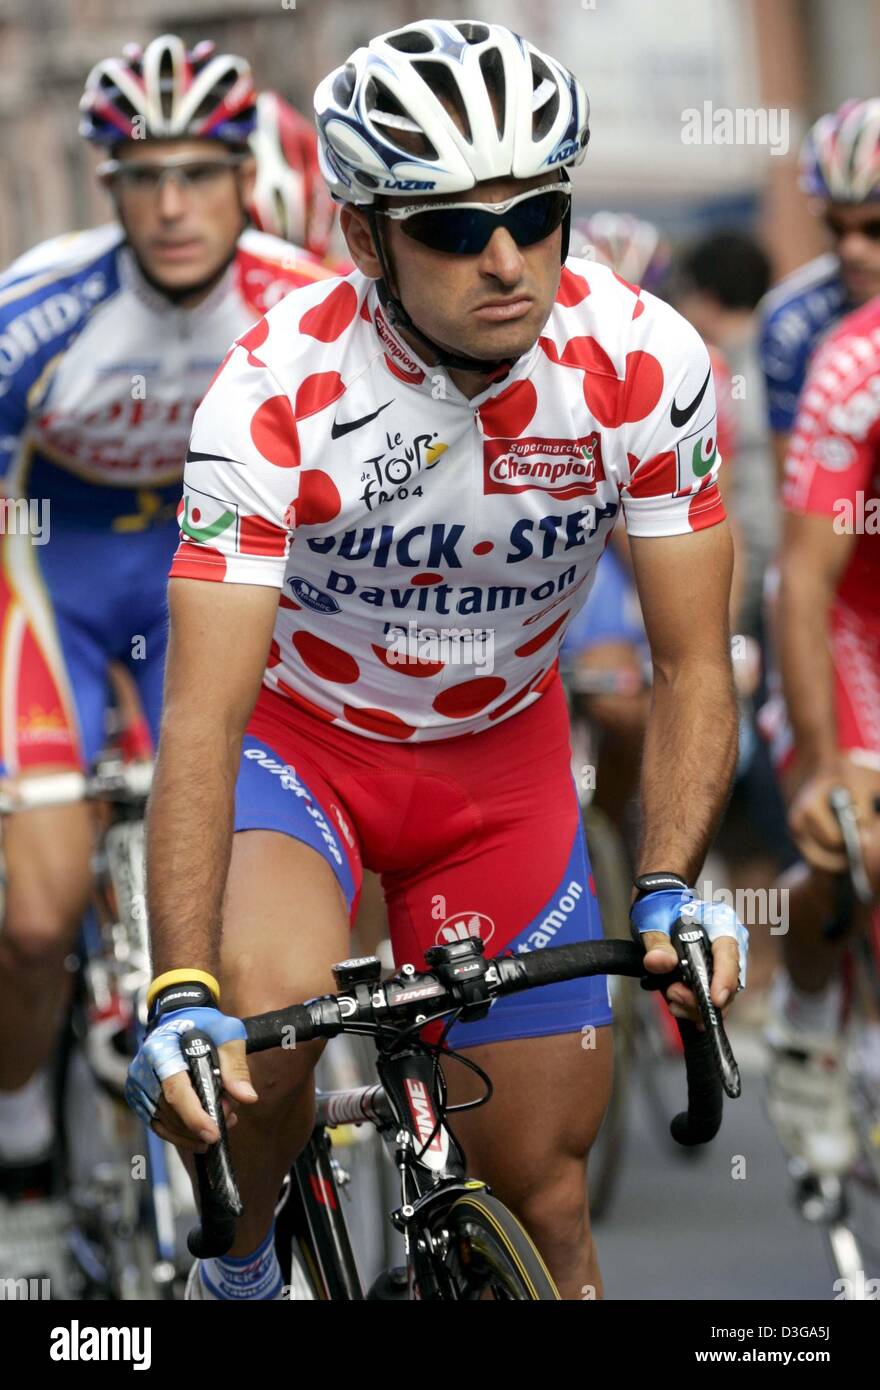 (dpa) - Italian cyclist Paolo Bettini (C) of team Quick Step-Davitamon rides on his bike during the second stage of the Tour de France in Namur, Belgium, 5 July 2004. The second and 197km long stage of the 91st Tour de France cycling race took the cyclists from Charleroi to Namur. Bettini took over the red polka dot jersey which is worn by the best mountain climber. Stock Photo